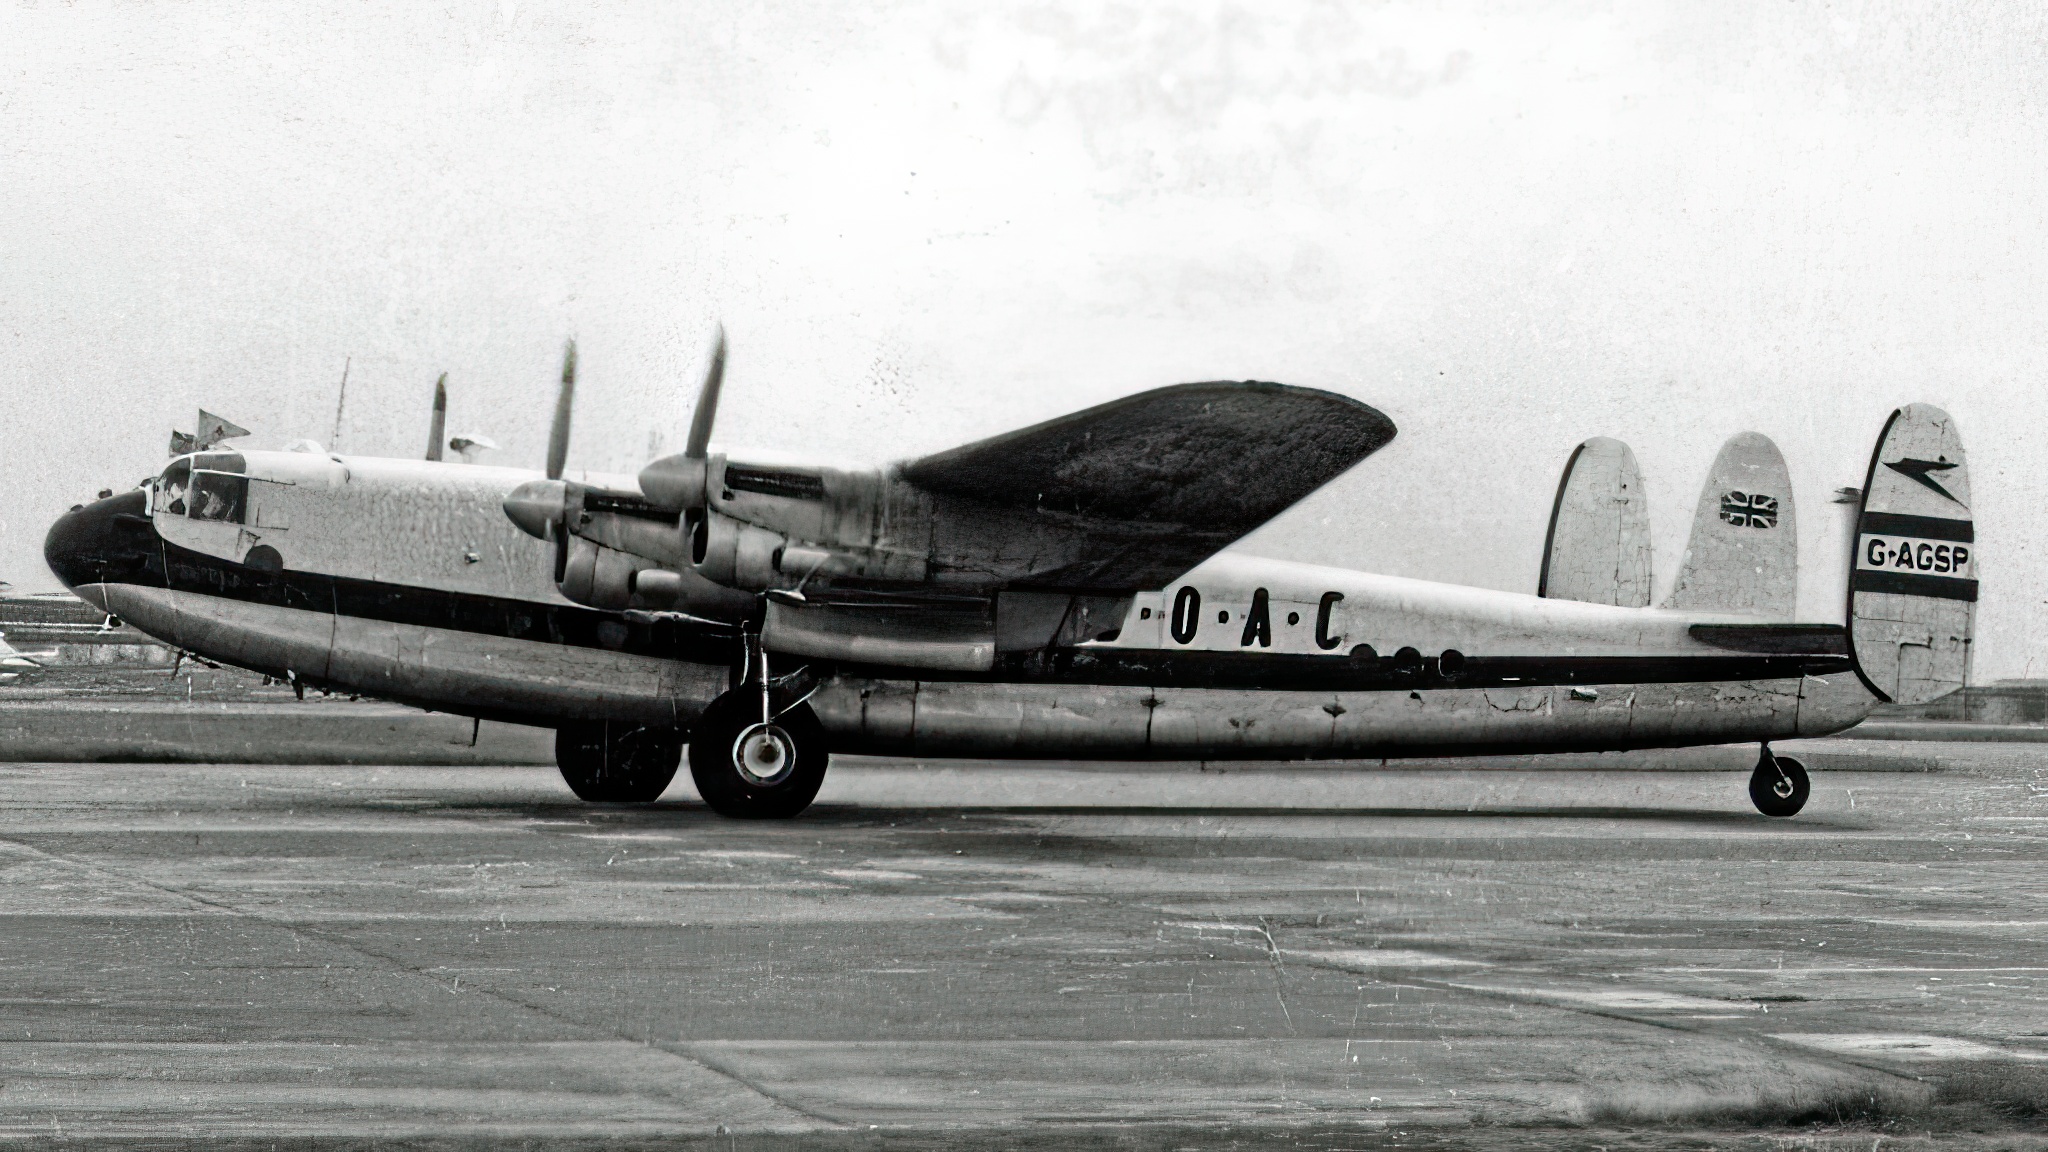 BOAC York operating a freight schedule at Heathrow in 1953